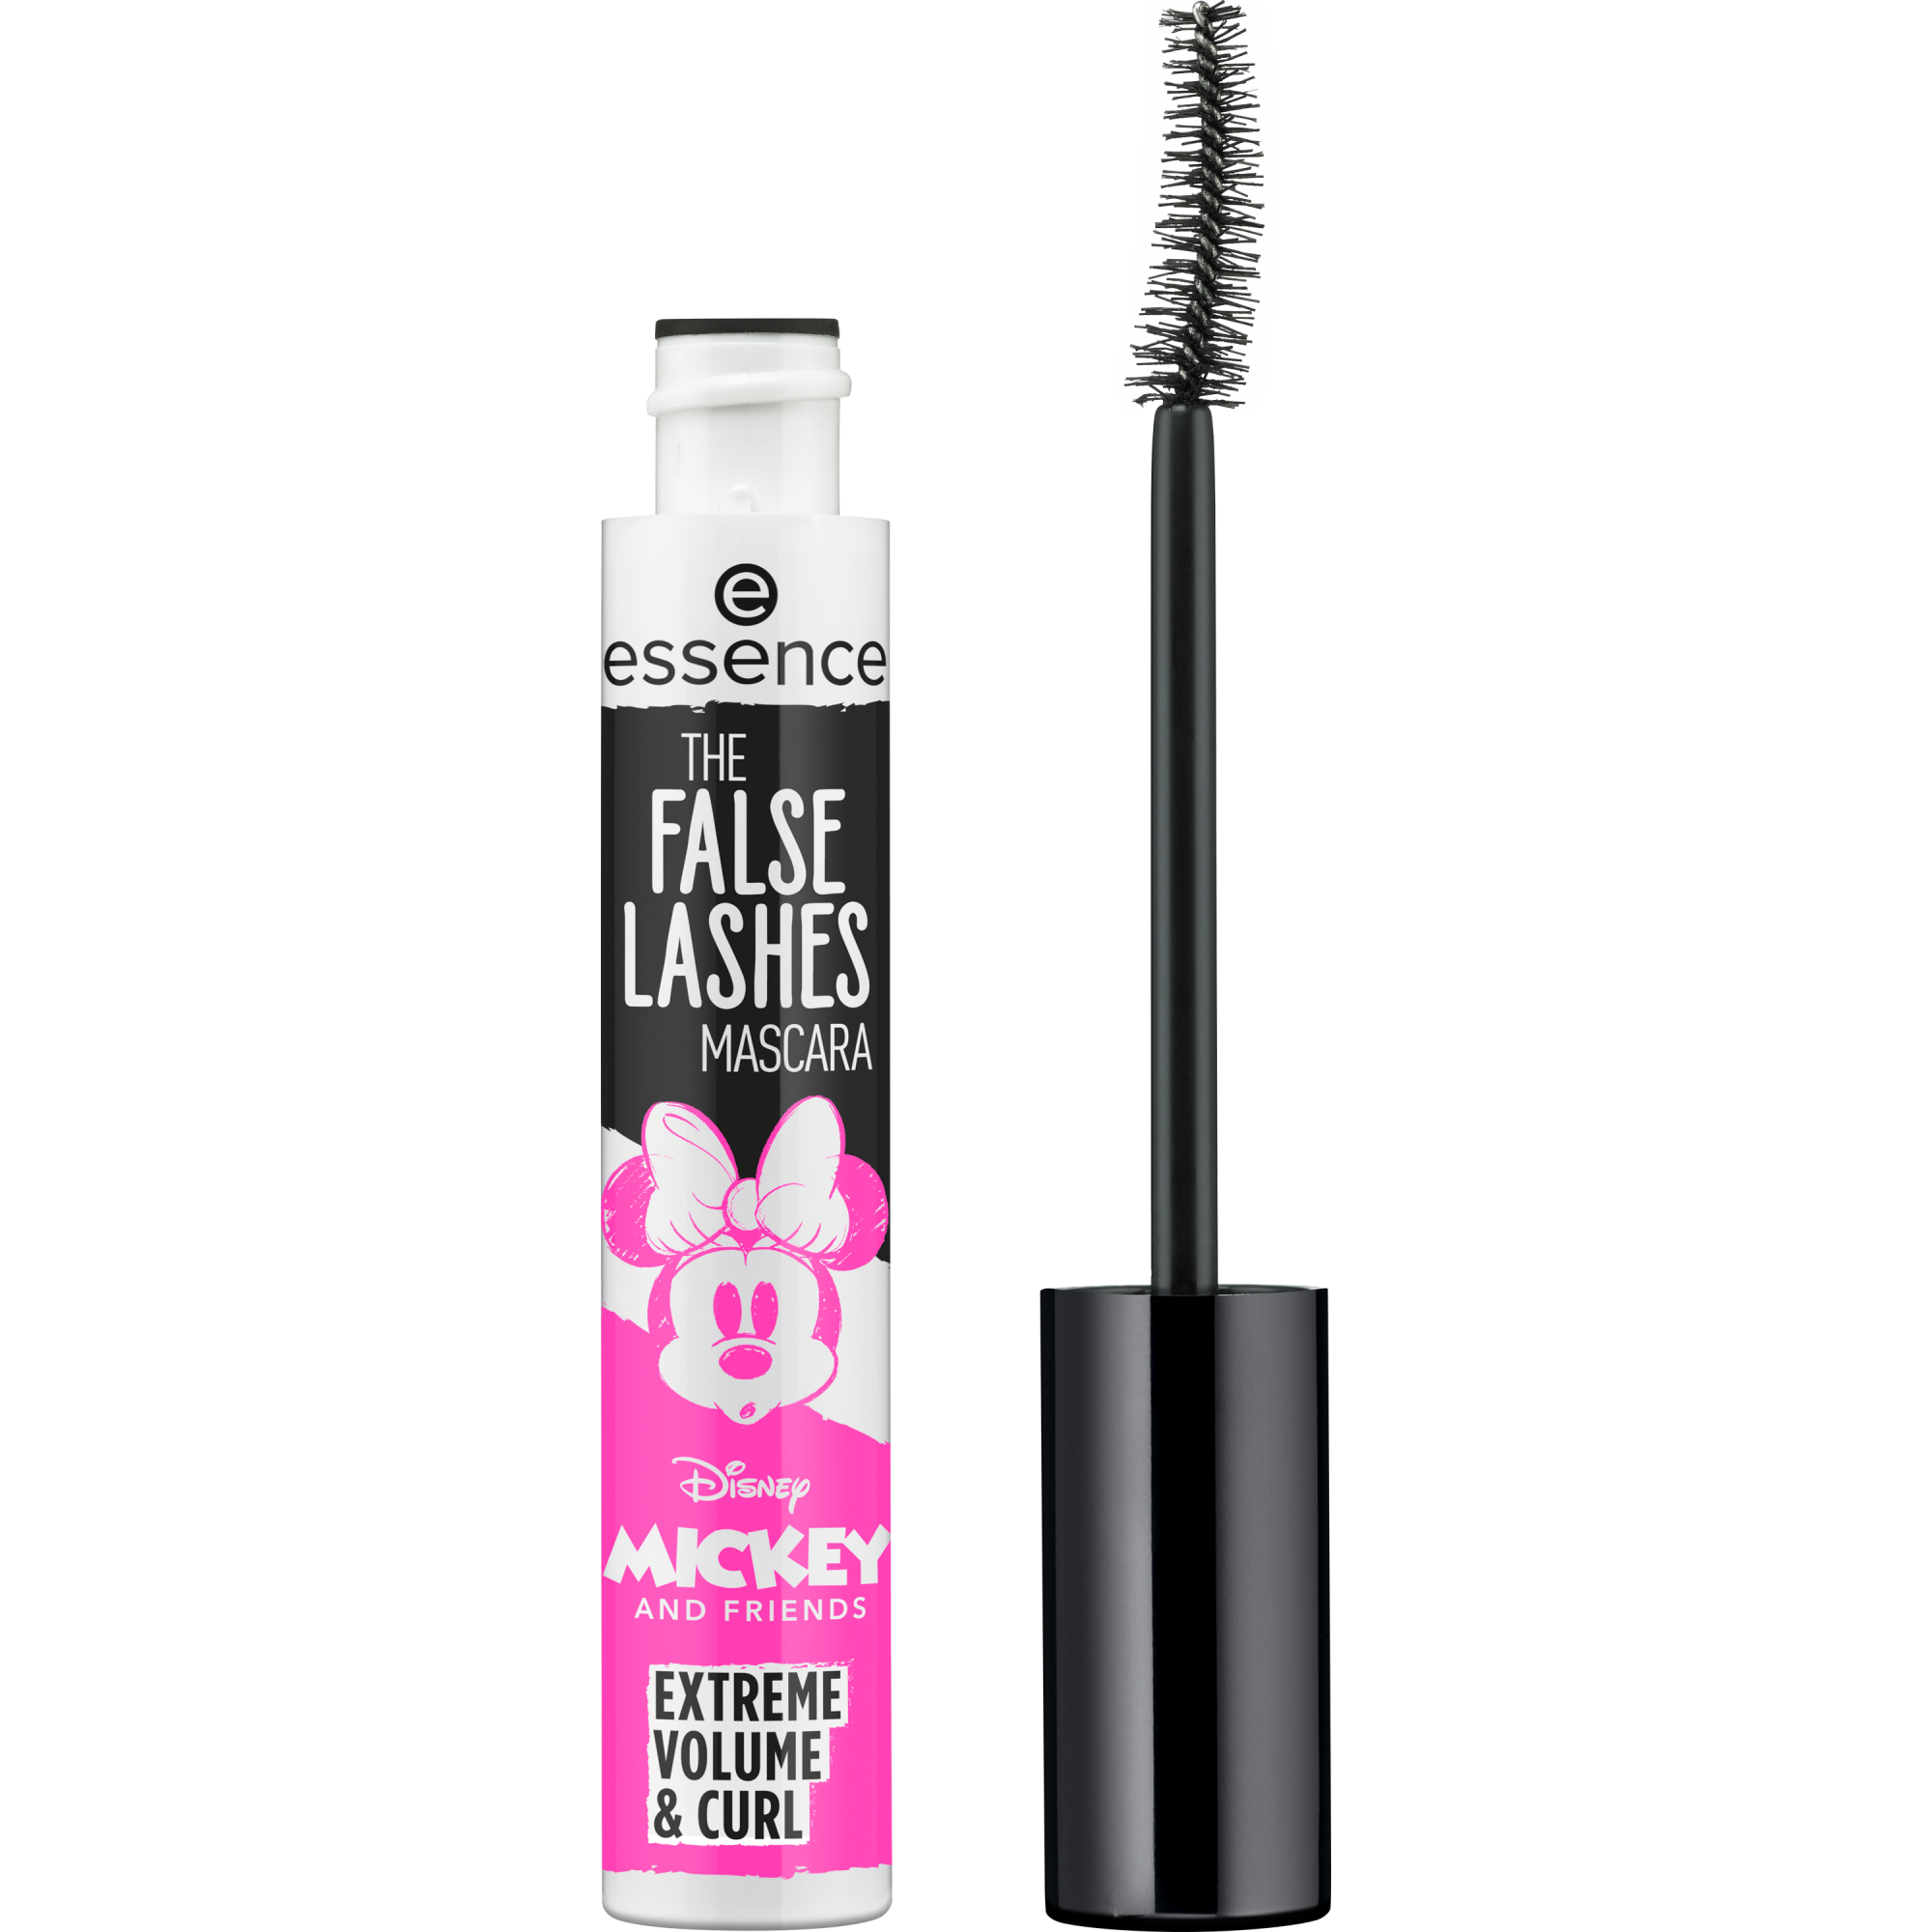 Disney Mickey and Friends THE FALSE LASHES MASCARA EXTREME VOLUME & CURL